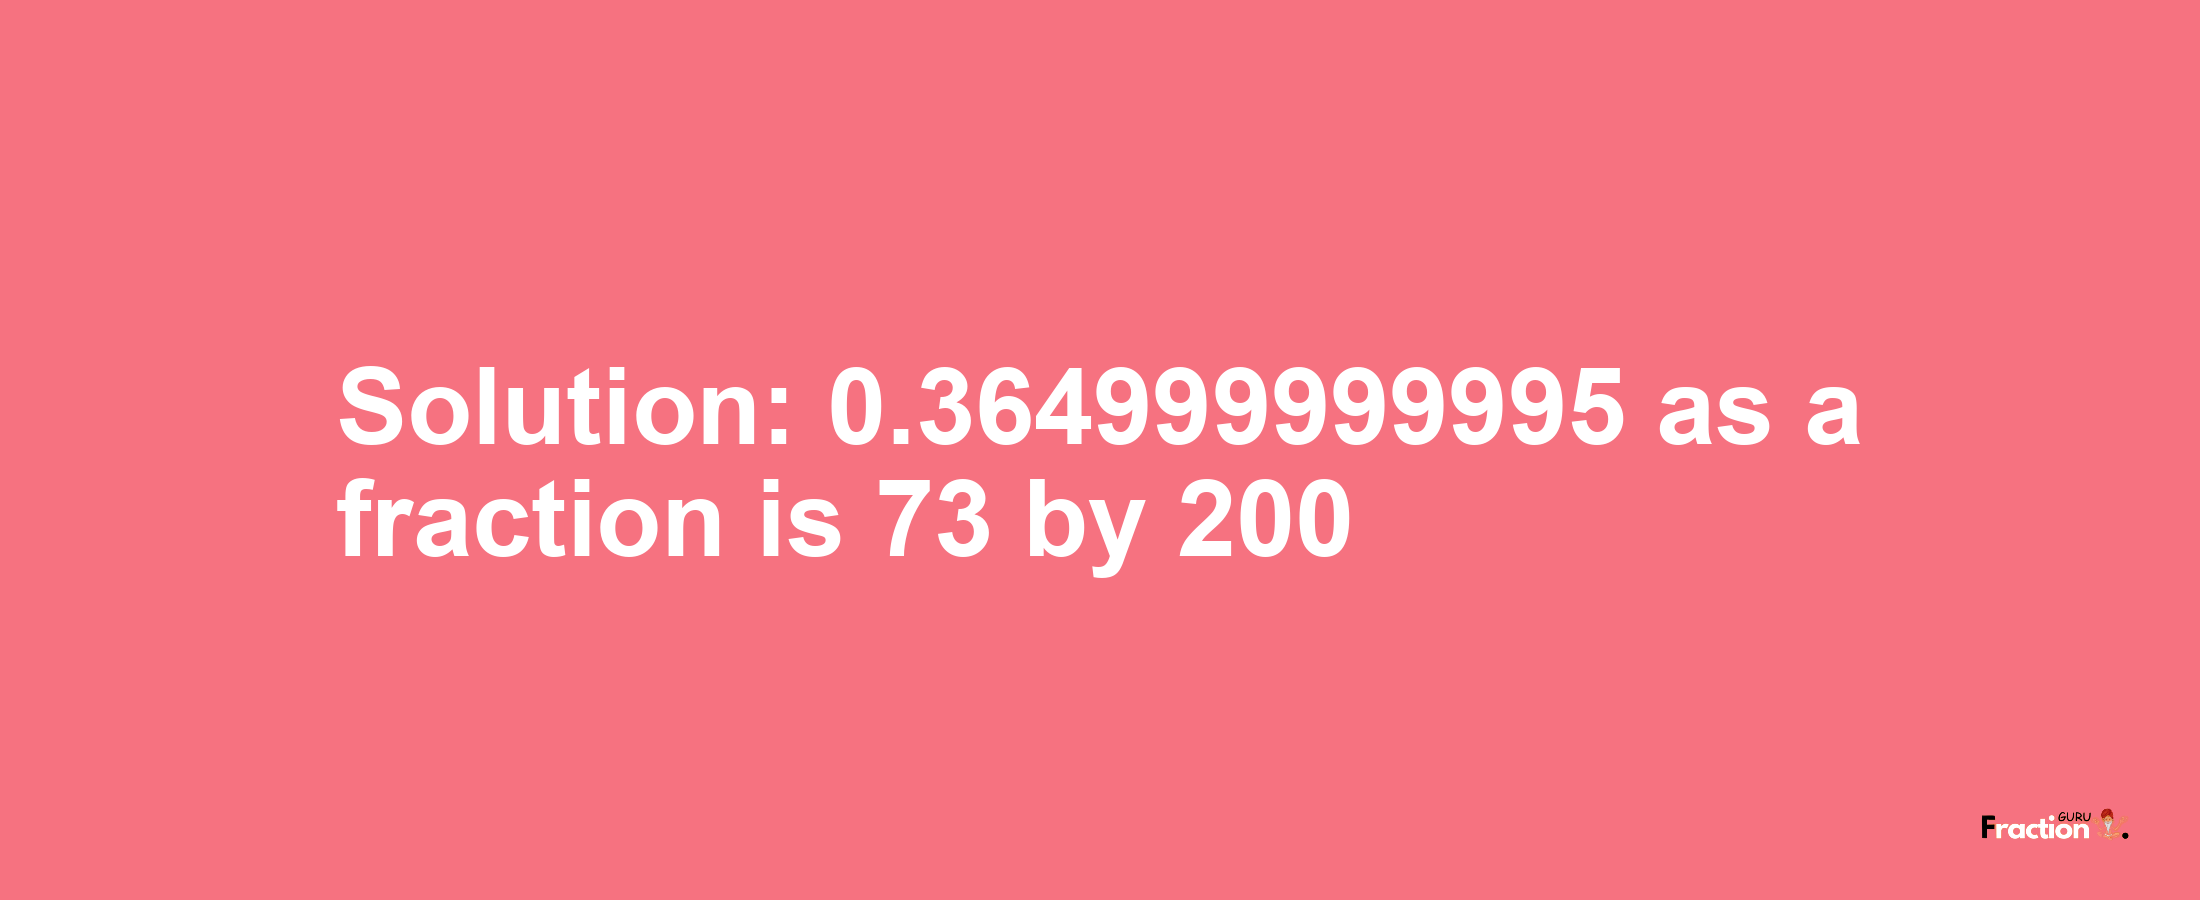 Solution:0.364999999995 as a fraction is 73/200